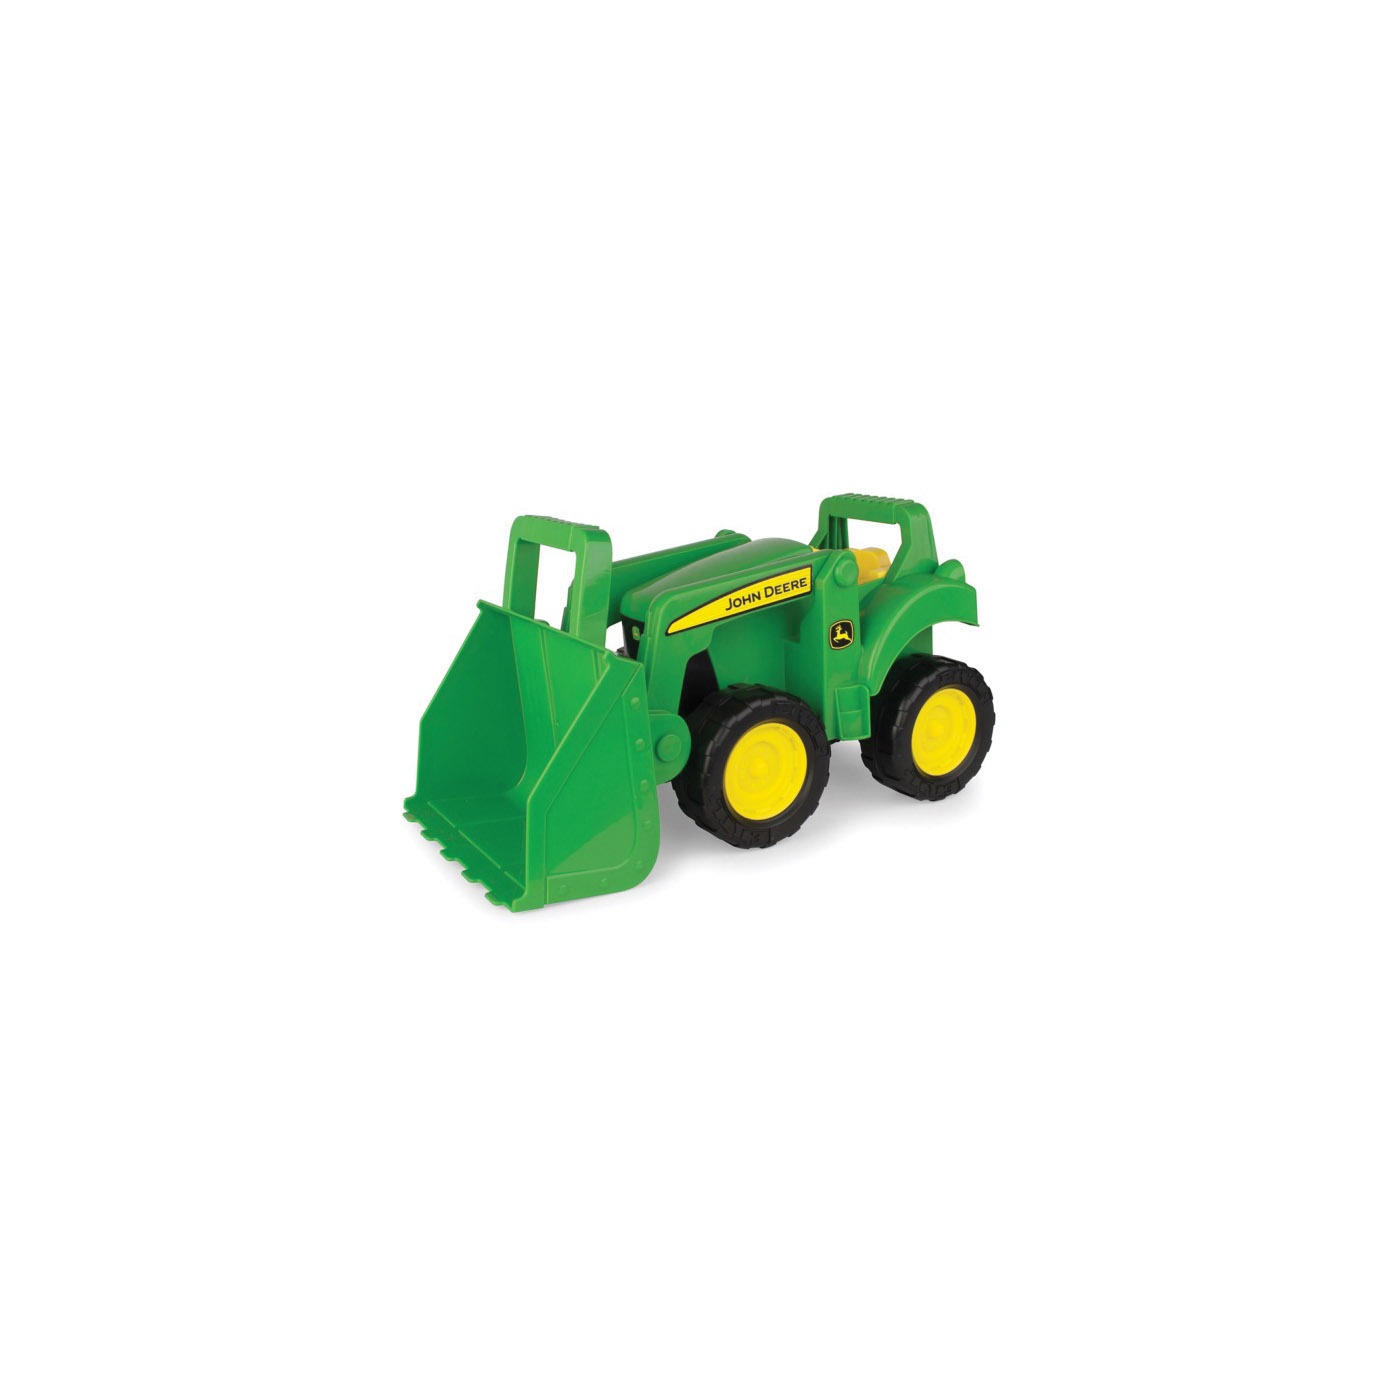 46701 Big Scoop Tractor Toy, 3 years and Up, Plastic